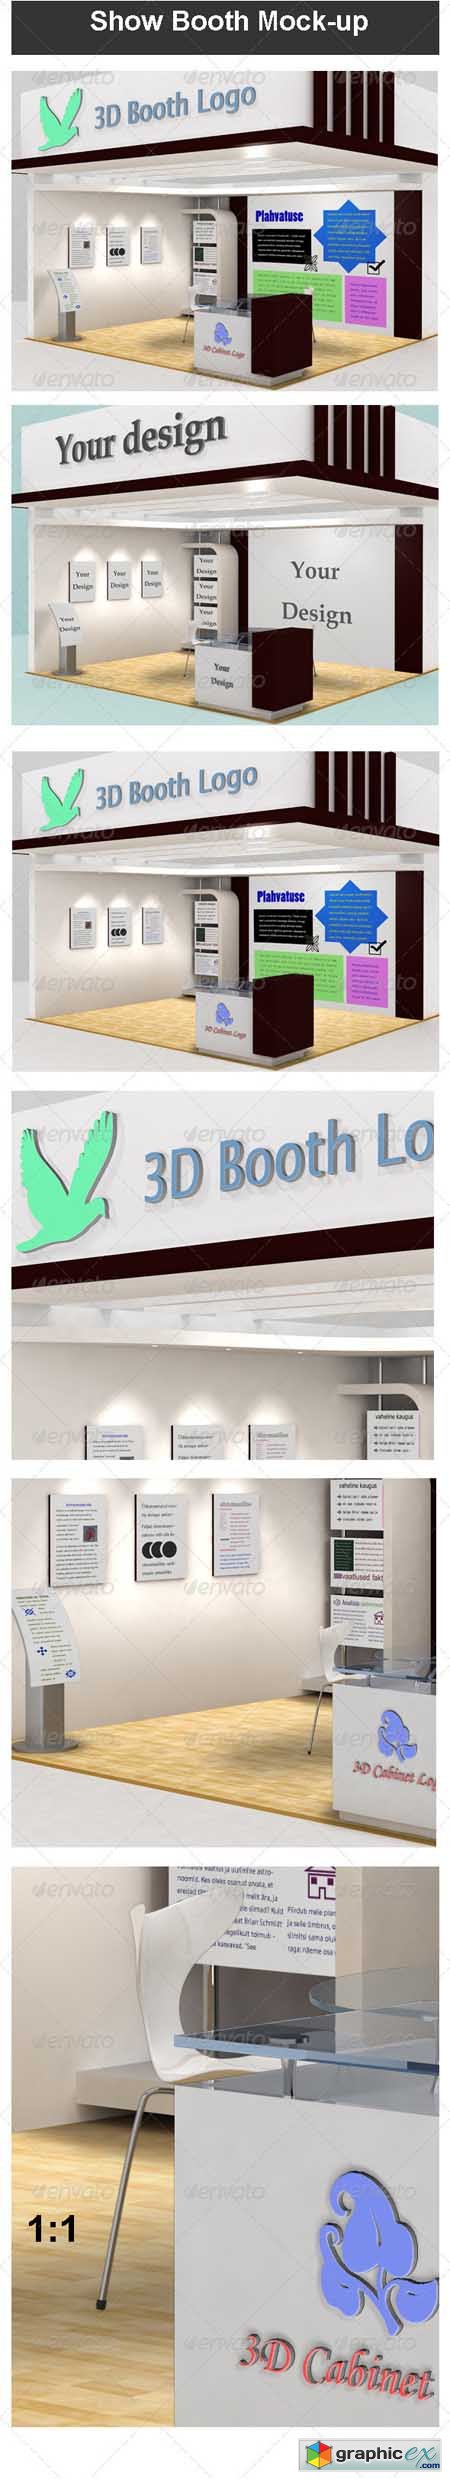 Show Booth Mock-up